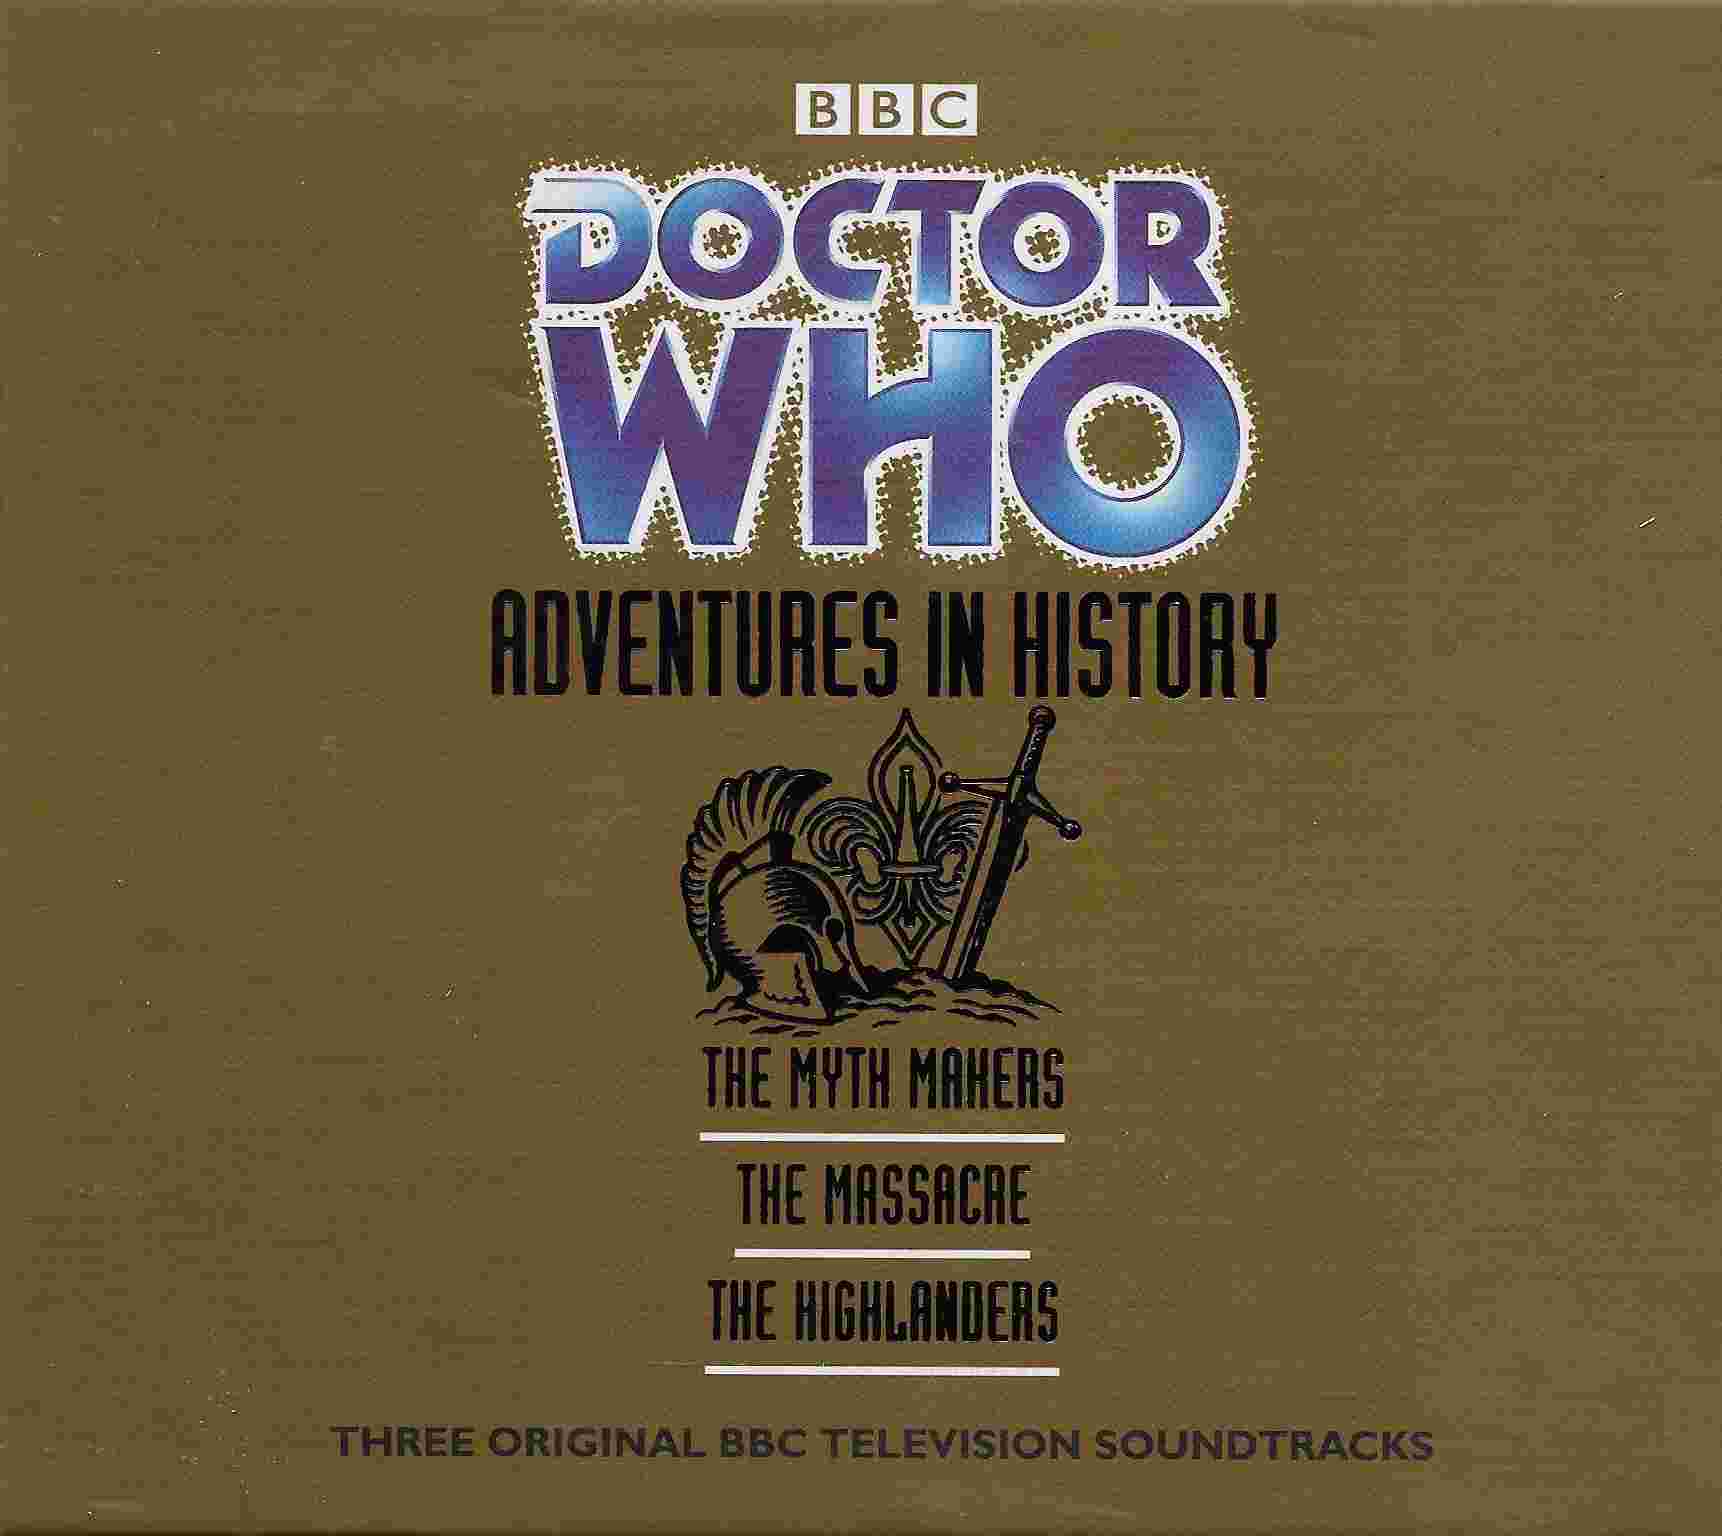 Picture of Doctor Who - Adventures in history by artist Donald Cotton / John Lucarotti / Gerry Davis	 from the BBC cds - Records and Tapes library